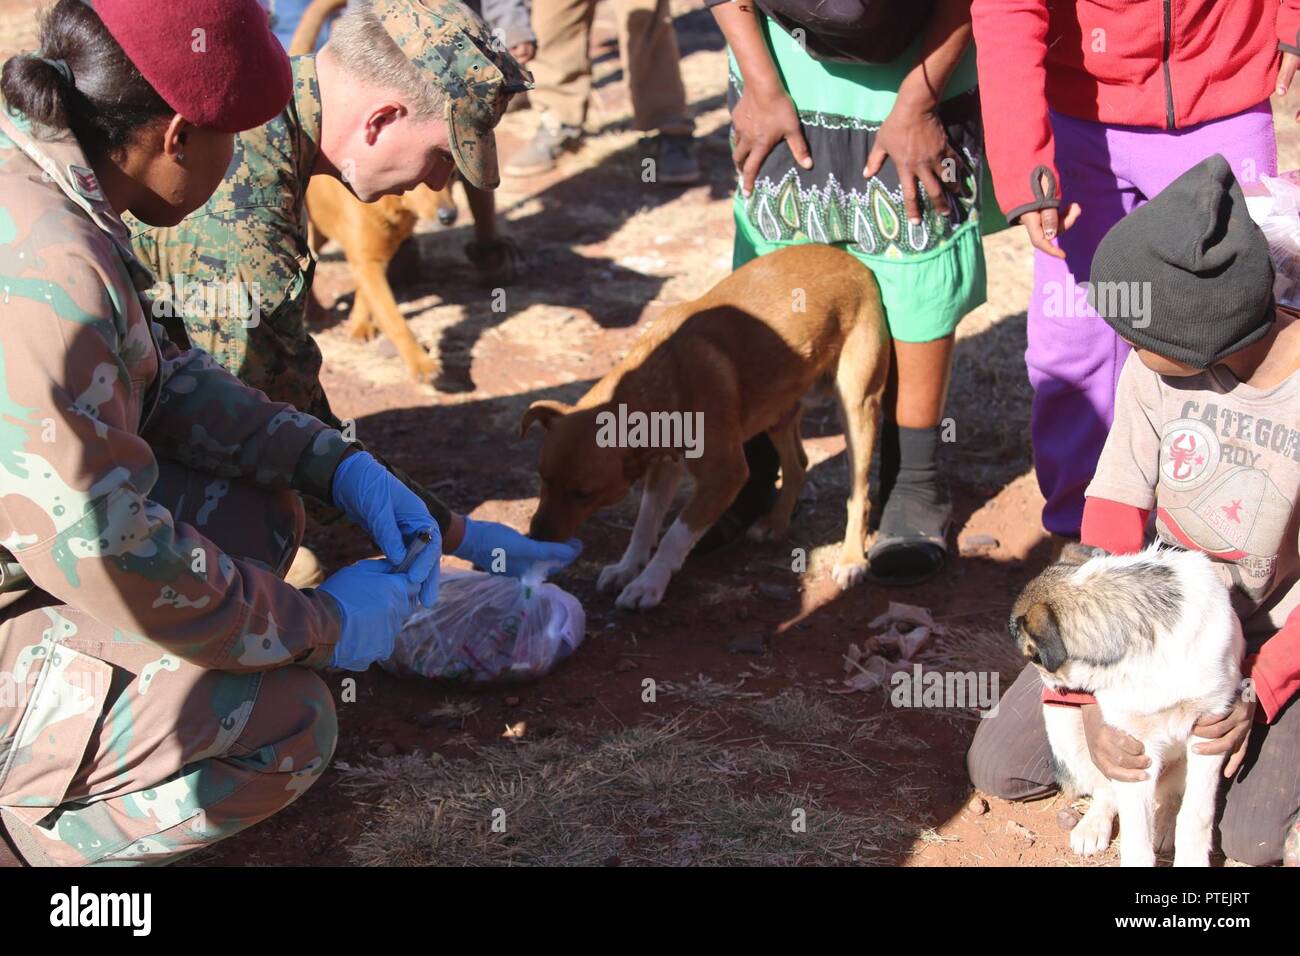 LCpl. Daniel Temple, 3rd Battalion, 25th Marines provides food for a dog while locals wait for free veterinary care during Mandela Day as part of Exercise Shared Accord 17 (SA17) in Postmasburg, South Africa, July 18, 2017. Mandela Day commemorates the lifetime of service Nelson Mandela gave to South Africa and the world, taking place every year on his birthday, with this years theme being, “action against poverty.” Stock Photo